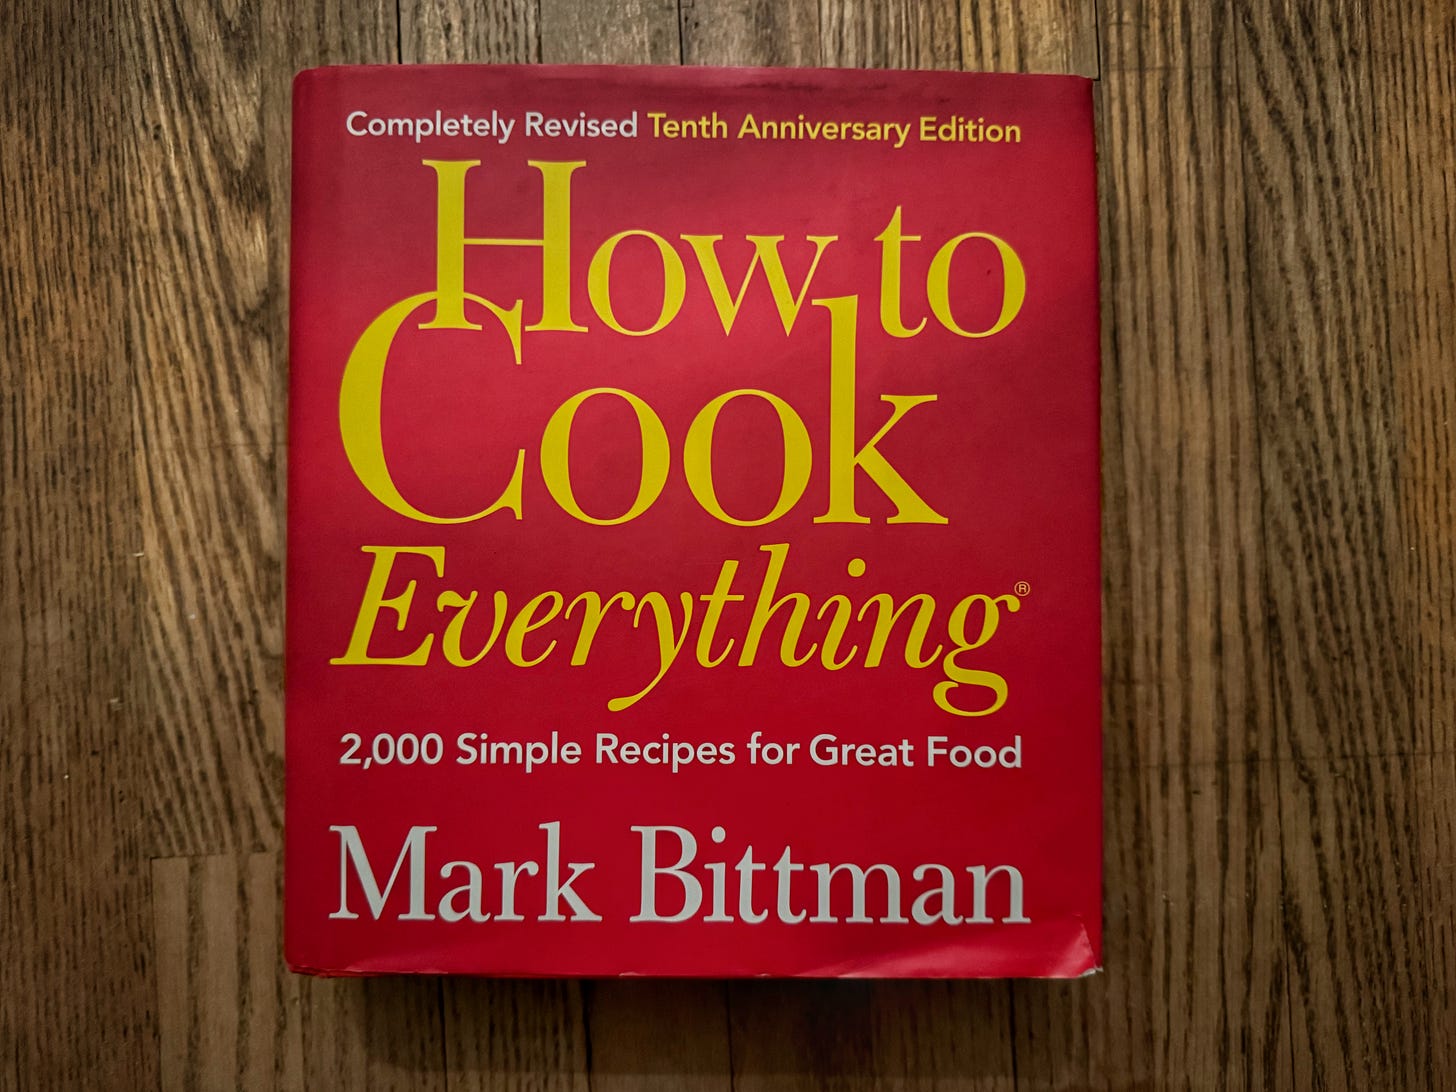 A copy of Mark Bittman's How to Cook Everything Tenth Anniversary Edition